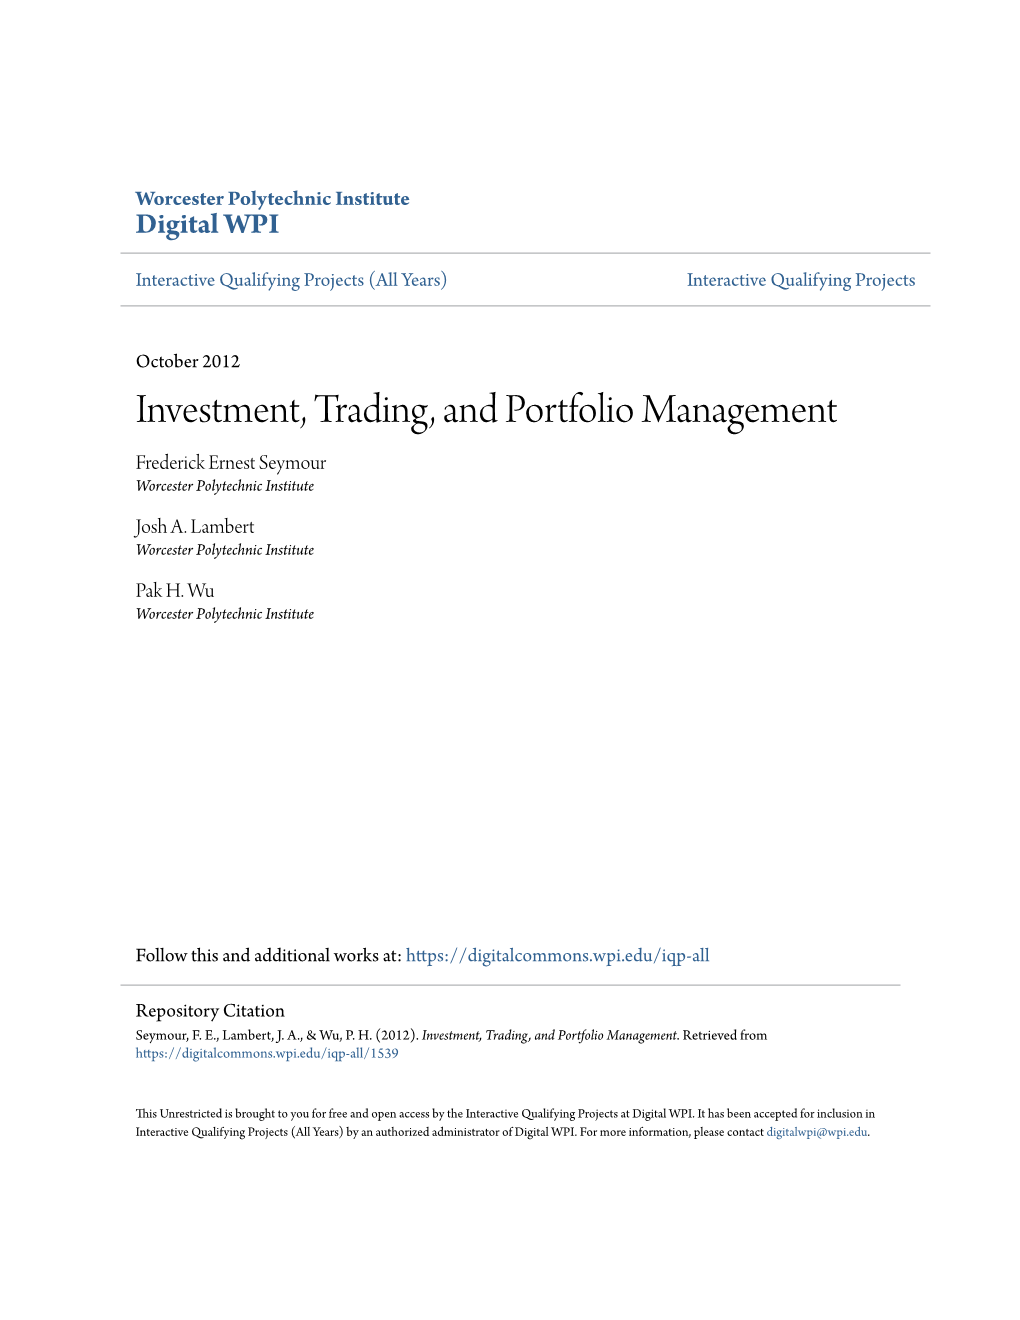 Investment, Trading, and Portfolio Management Frederick Ernest Seymour Worcester Polytechnic Institute